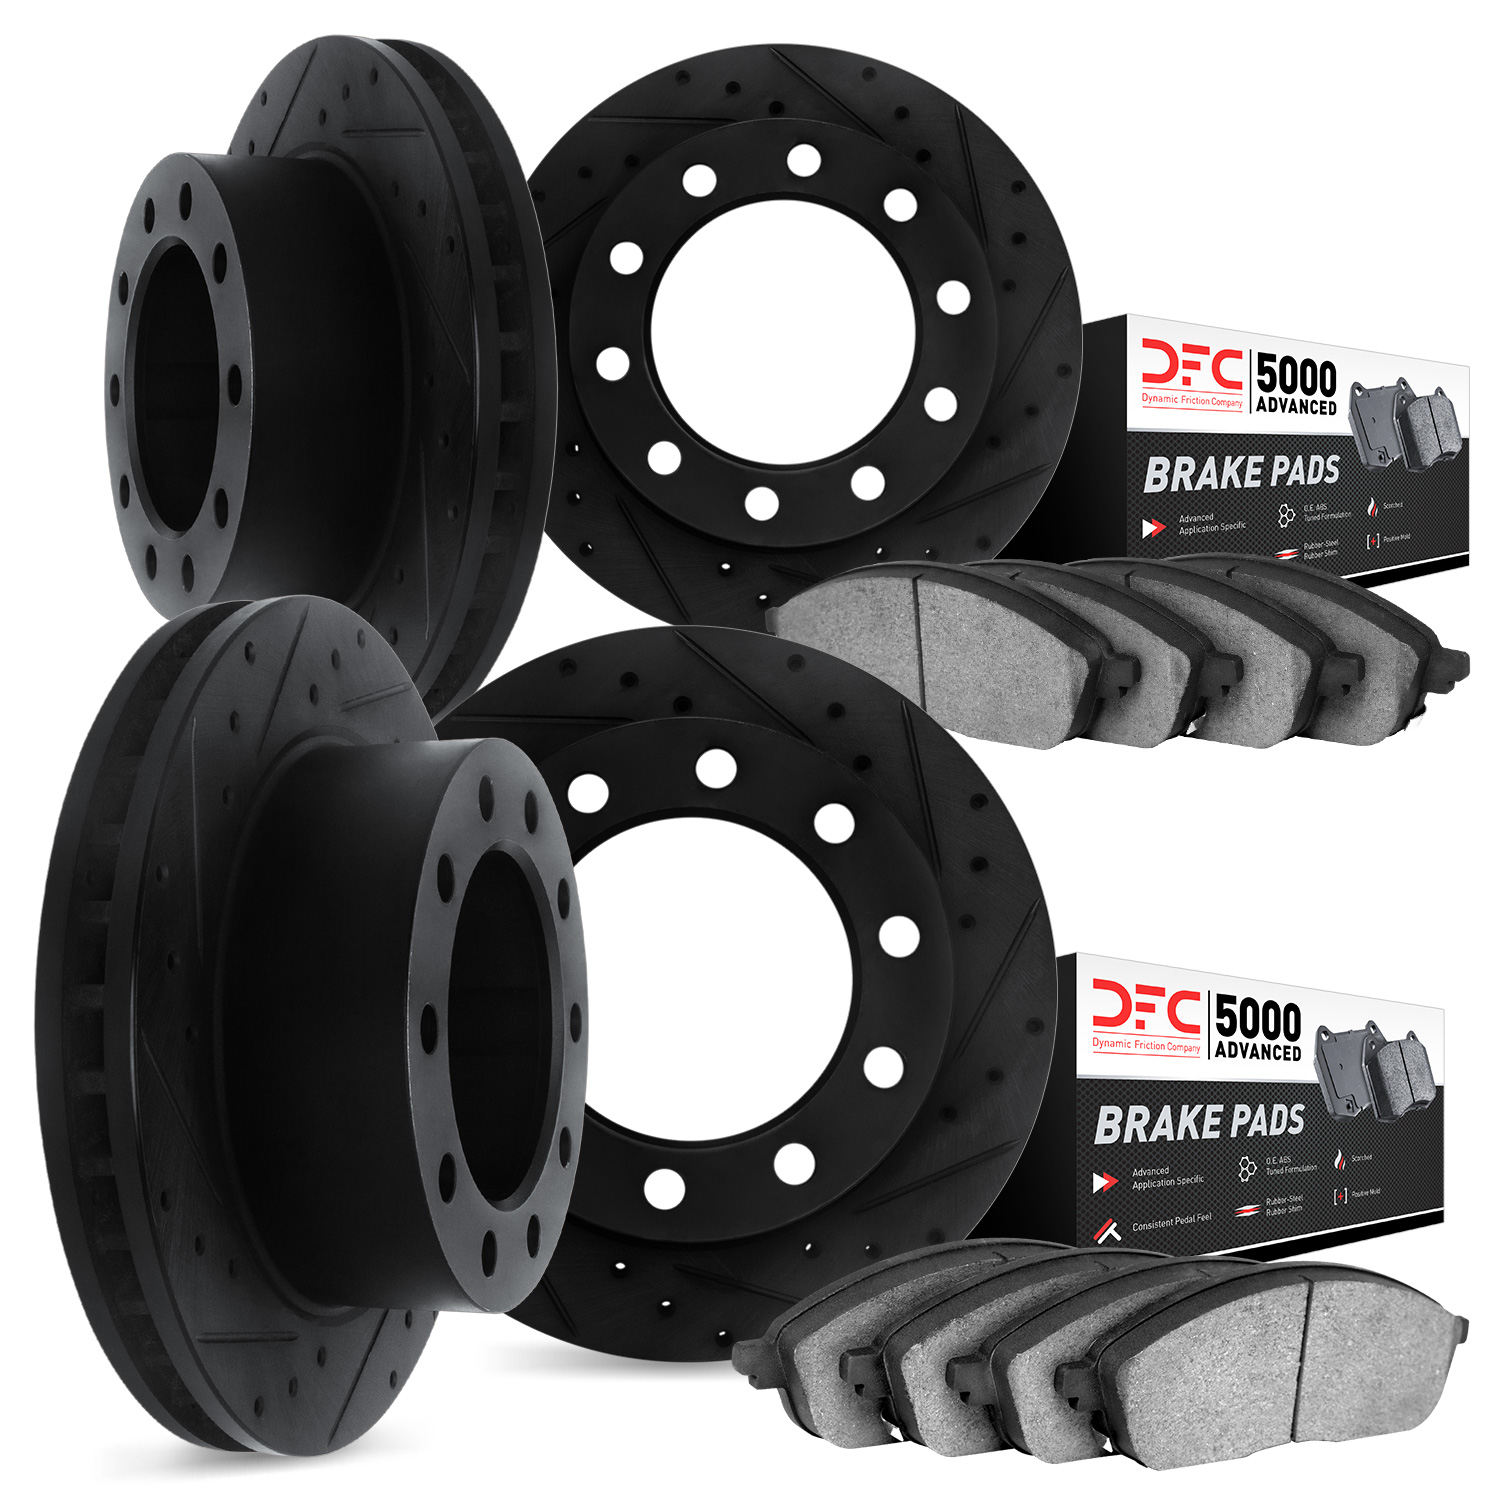 8504-54394 Drilled/Slotted Brake Rotors w/5000 Advanced Brake Pads Kit [Black], Fits Select Ford/Lincoln/Mercury/Mazda, Position